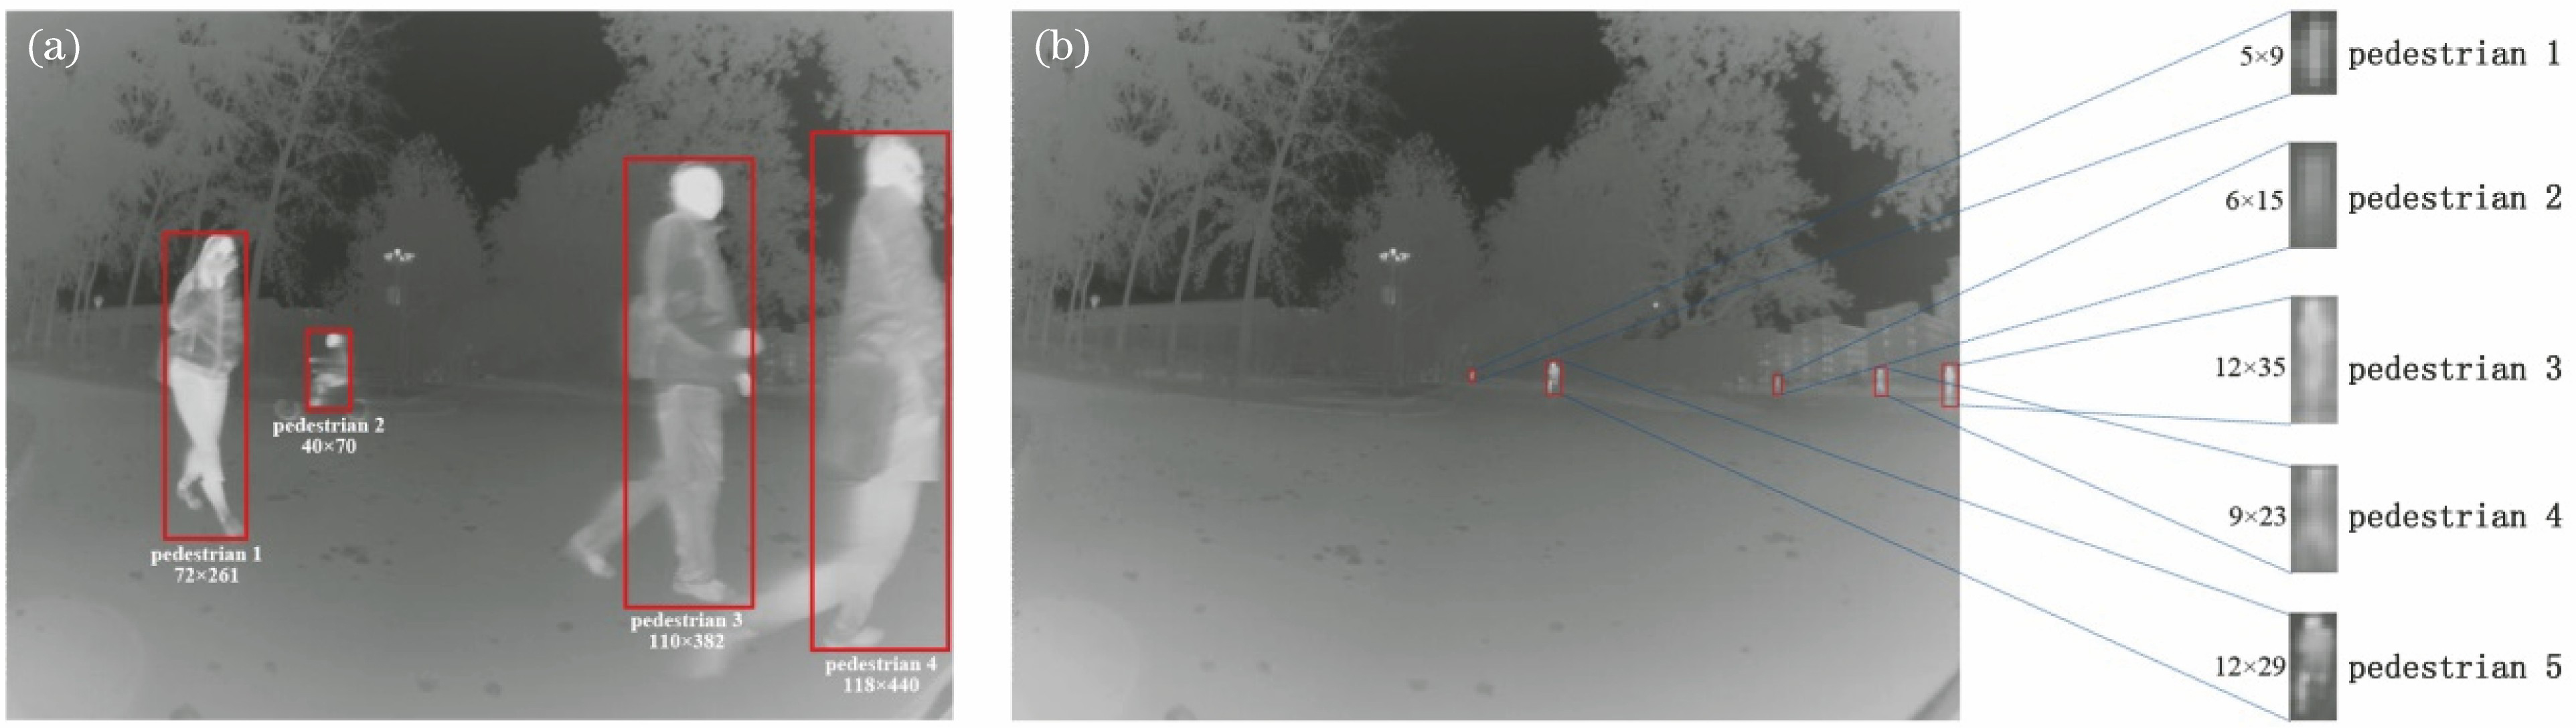 Characteristic of pedestrian in U-FOV infrared images. (a) Large and medium scale pedestrians; (b) small scale pedestrians